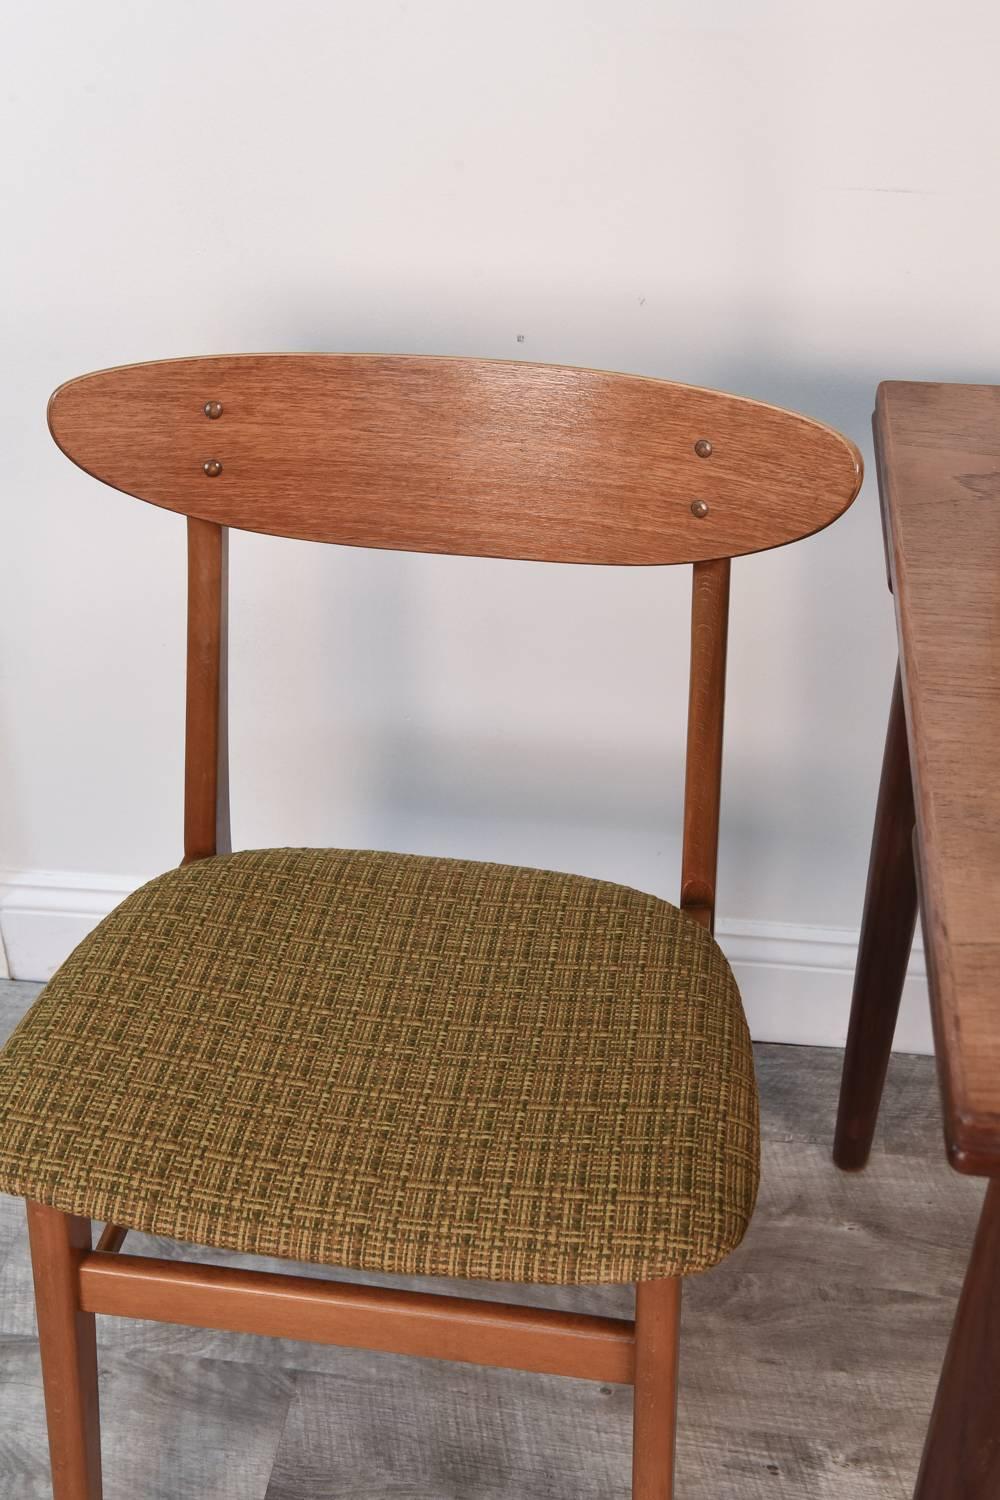 A nicely matched set of Danish teak table and chairs!